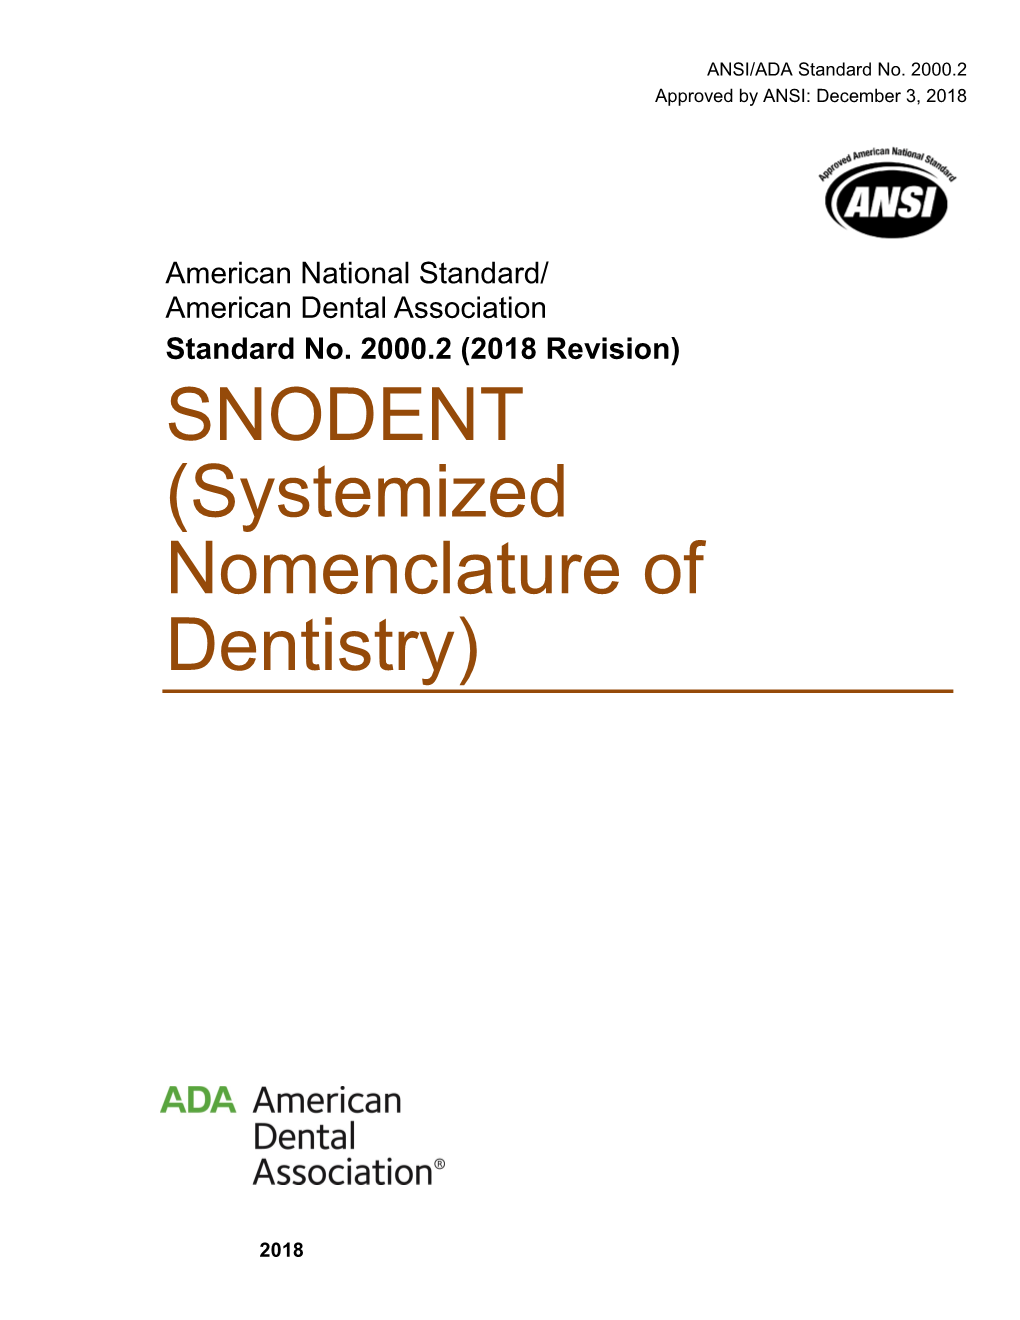 SNODENT (Systemized Nomenclature of Dentistry)